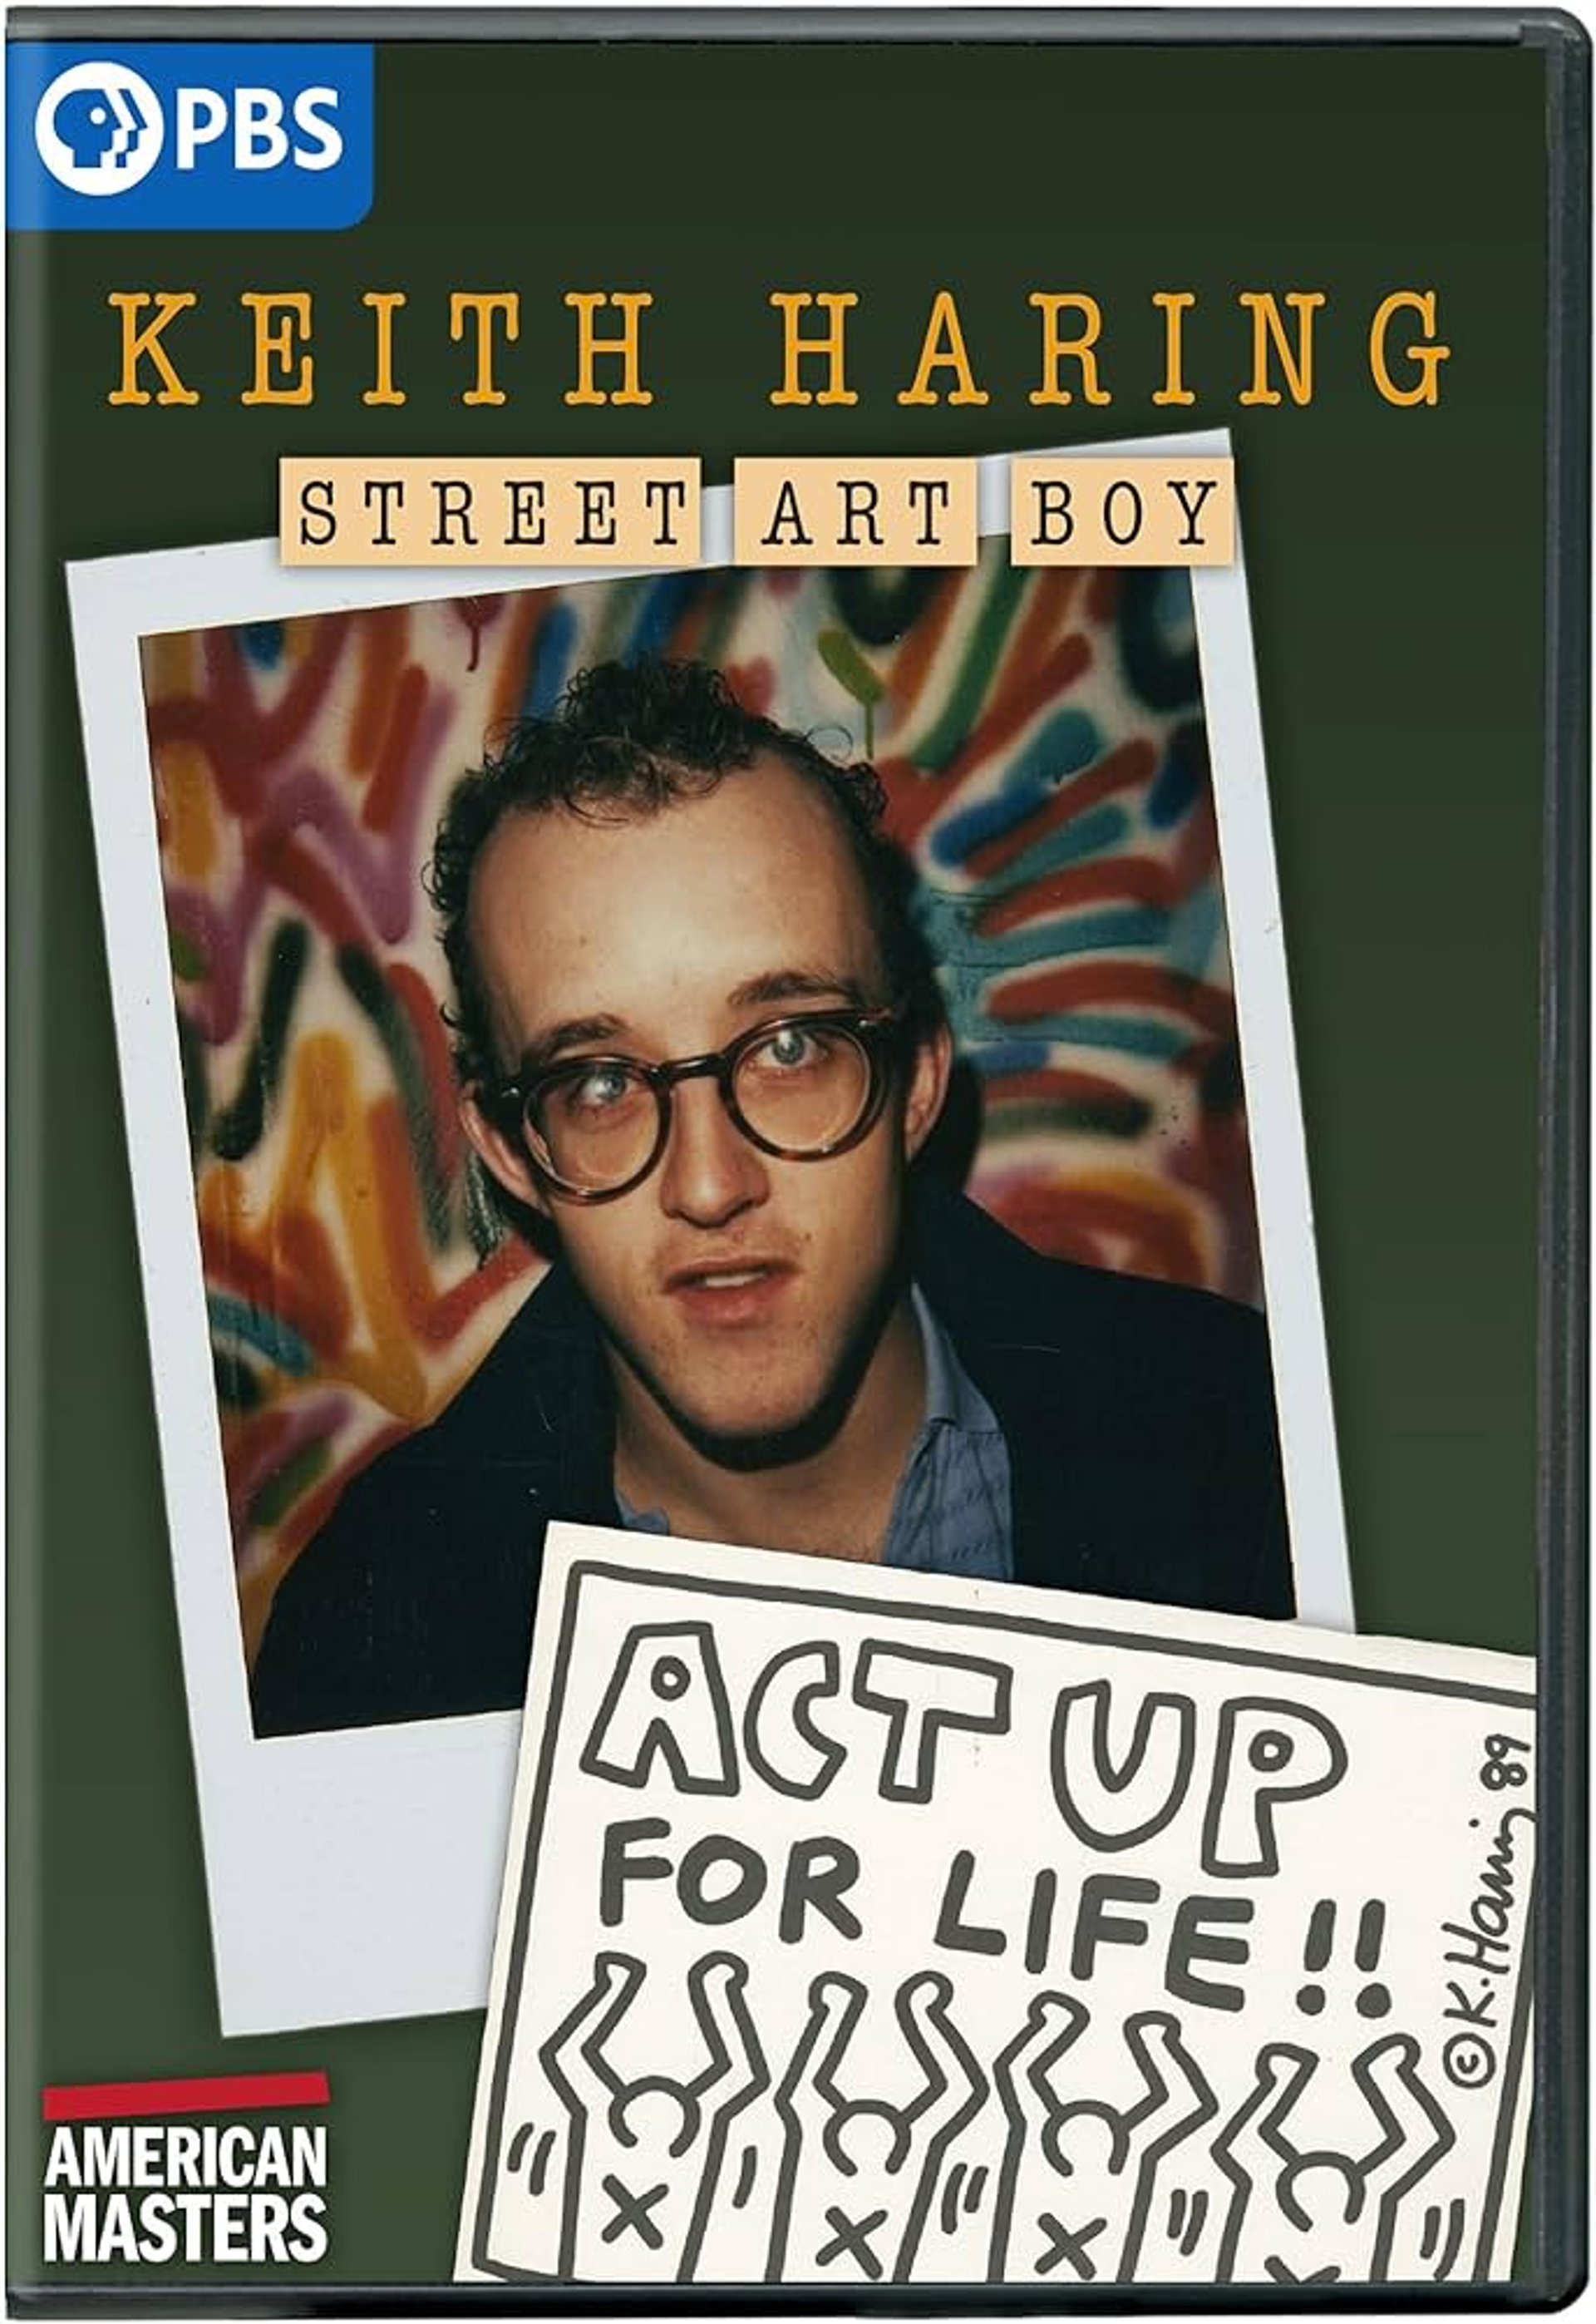 An image of the film poster, which shows a polaroid-style photo of Keith Haring, wearing his signature dark glasses and looking at the camera. His artwork Act Up For Life is in the foreground.